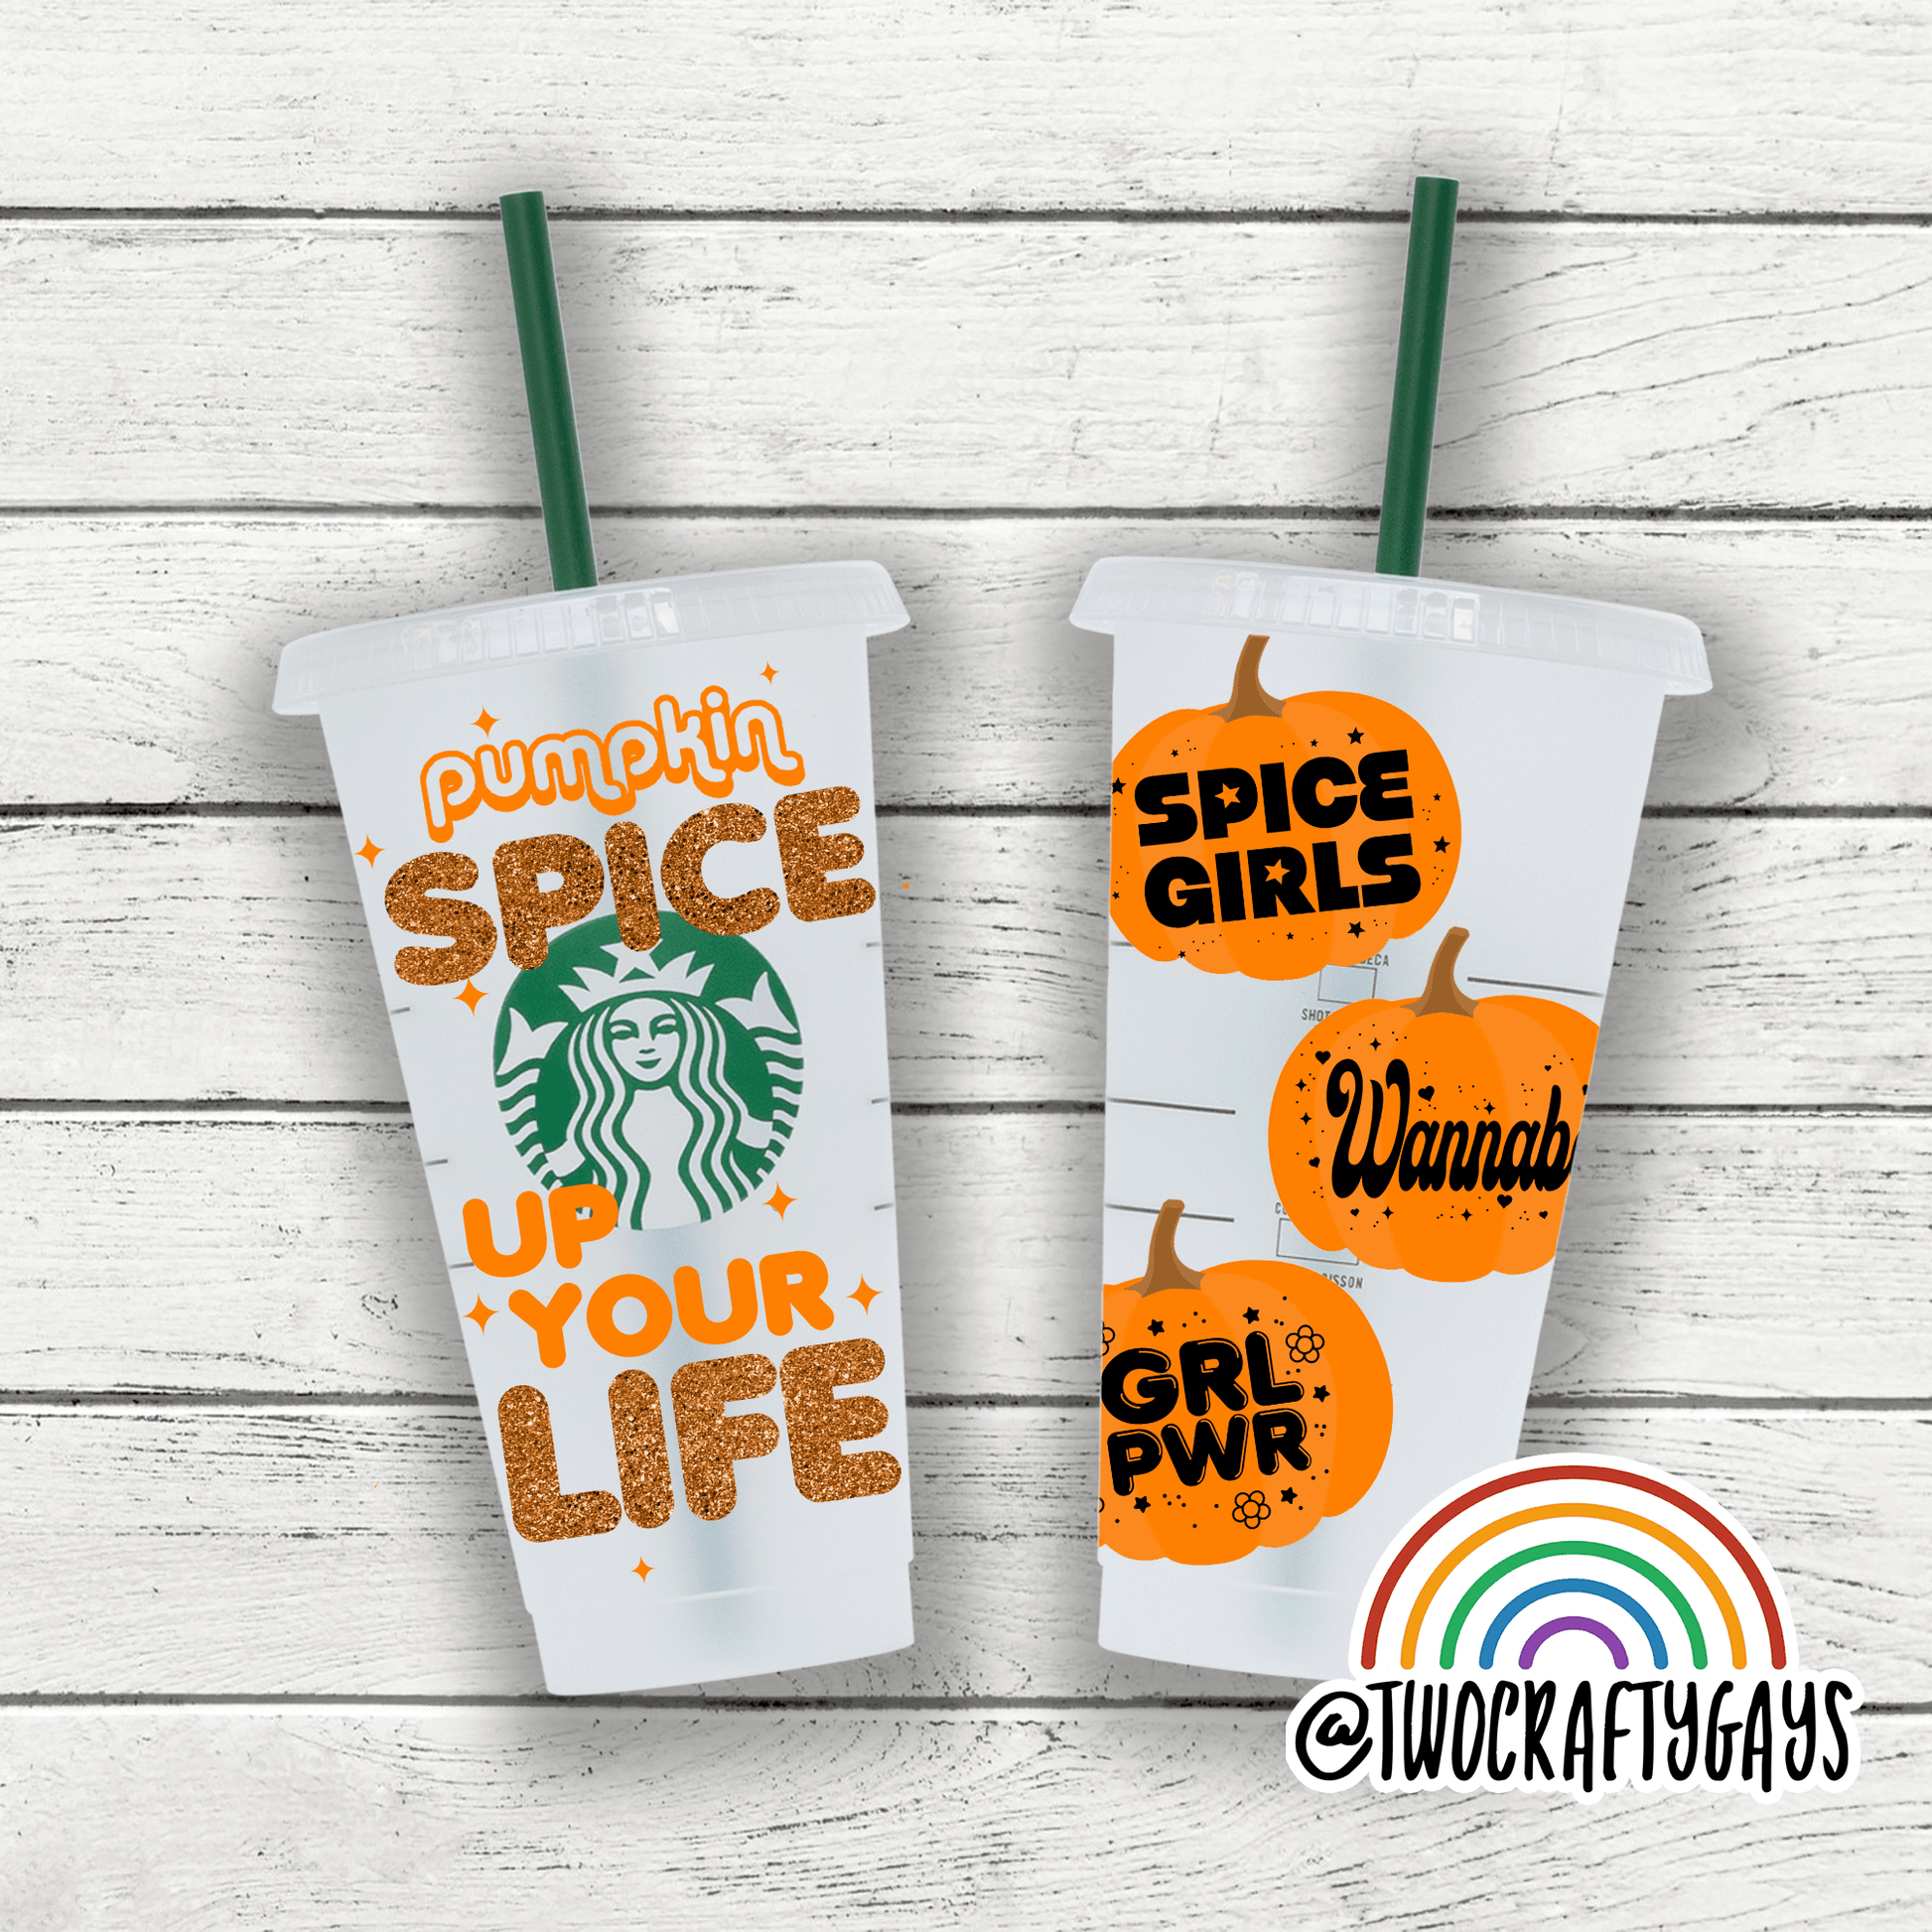 Spice Girls "Spice Up Your Life" Tumbler Cup - Two Crafty Gays